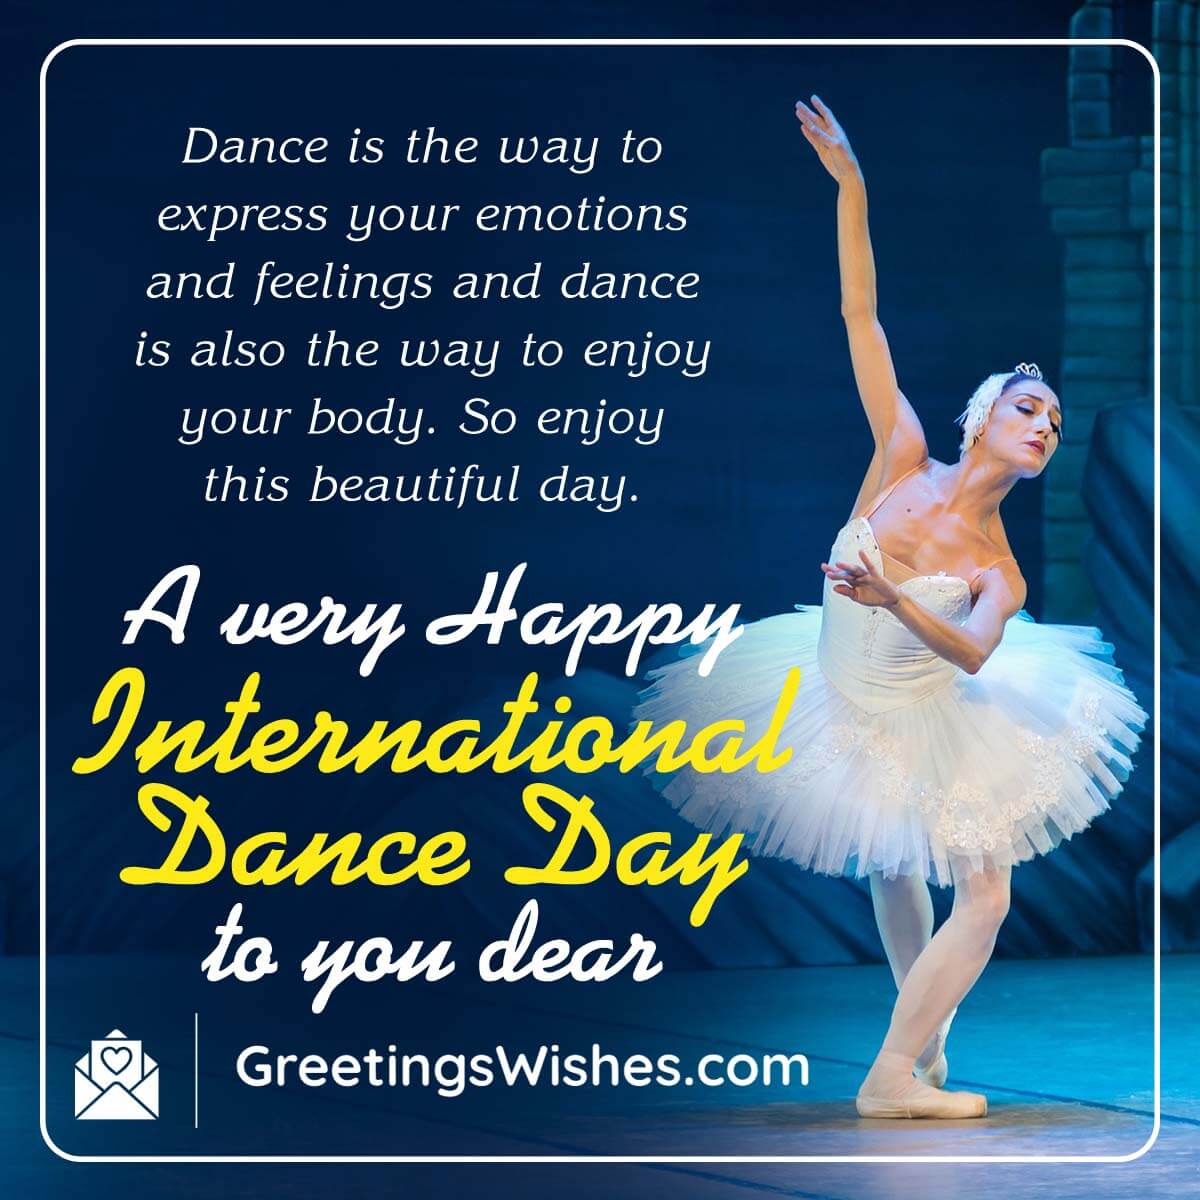 Dance Day Wishes